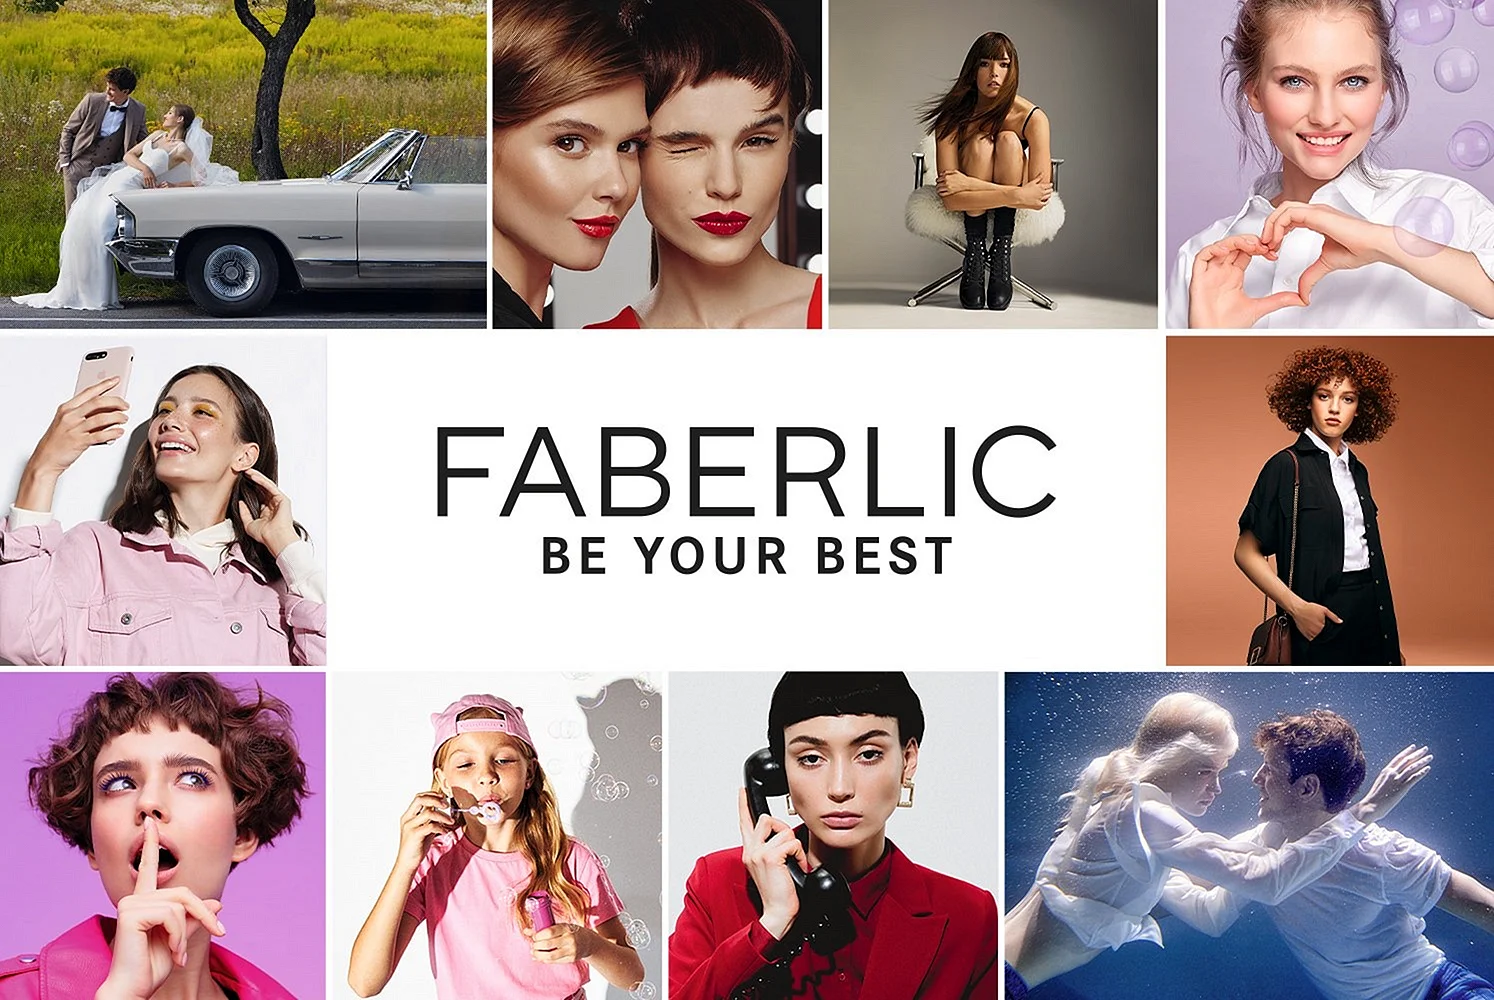 Faberlic be your best